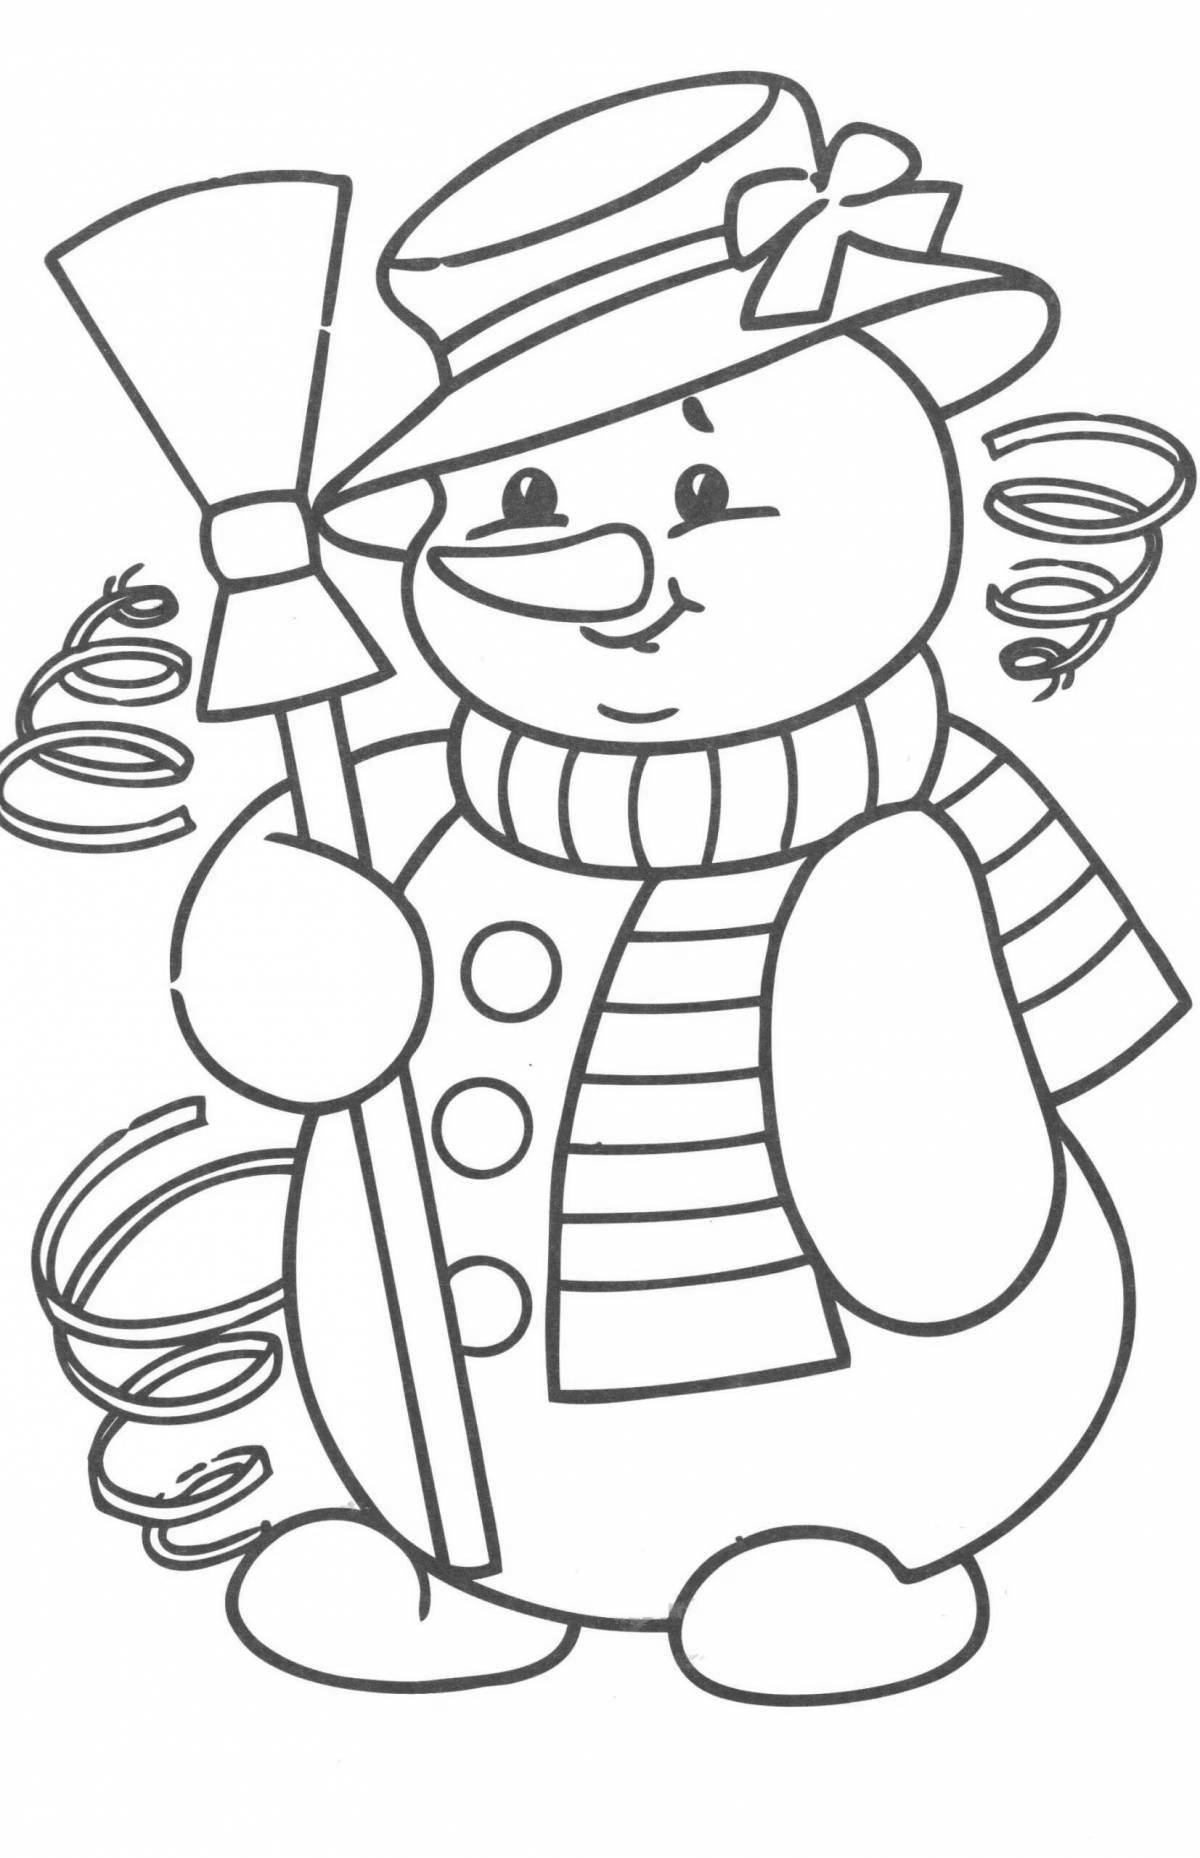 Playful coloring book funny snowman for kids